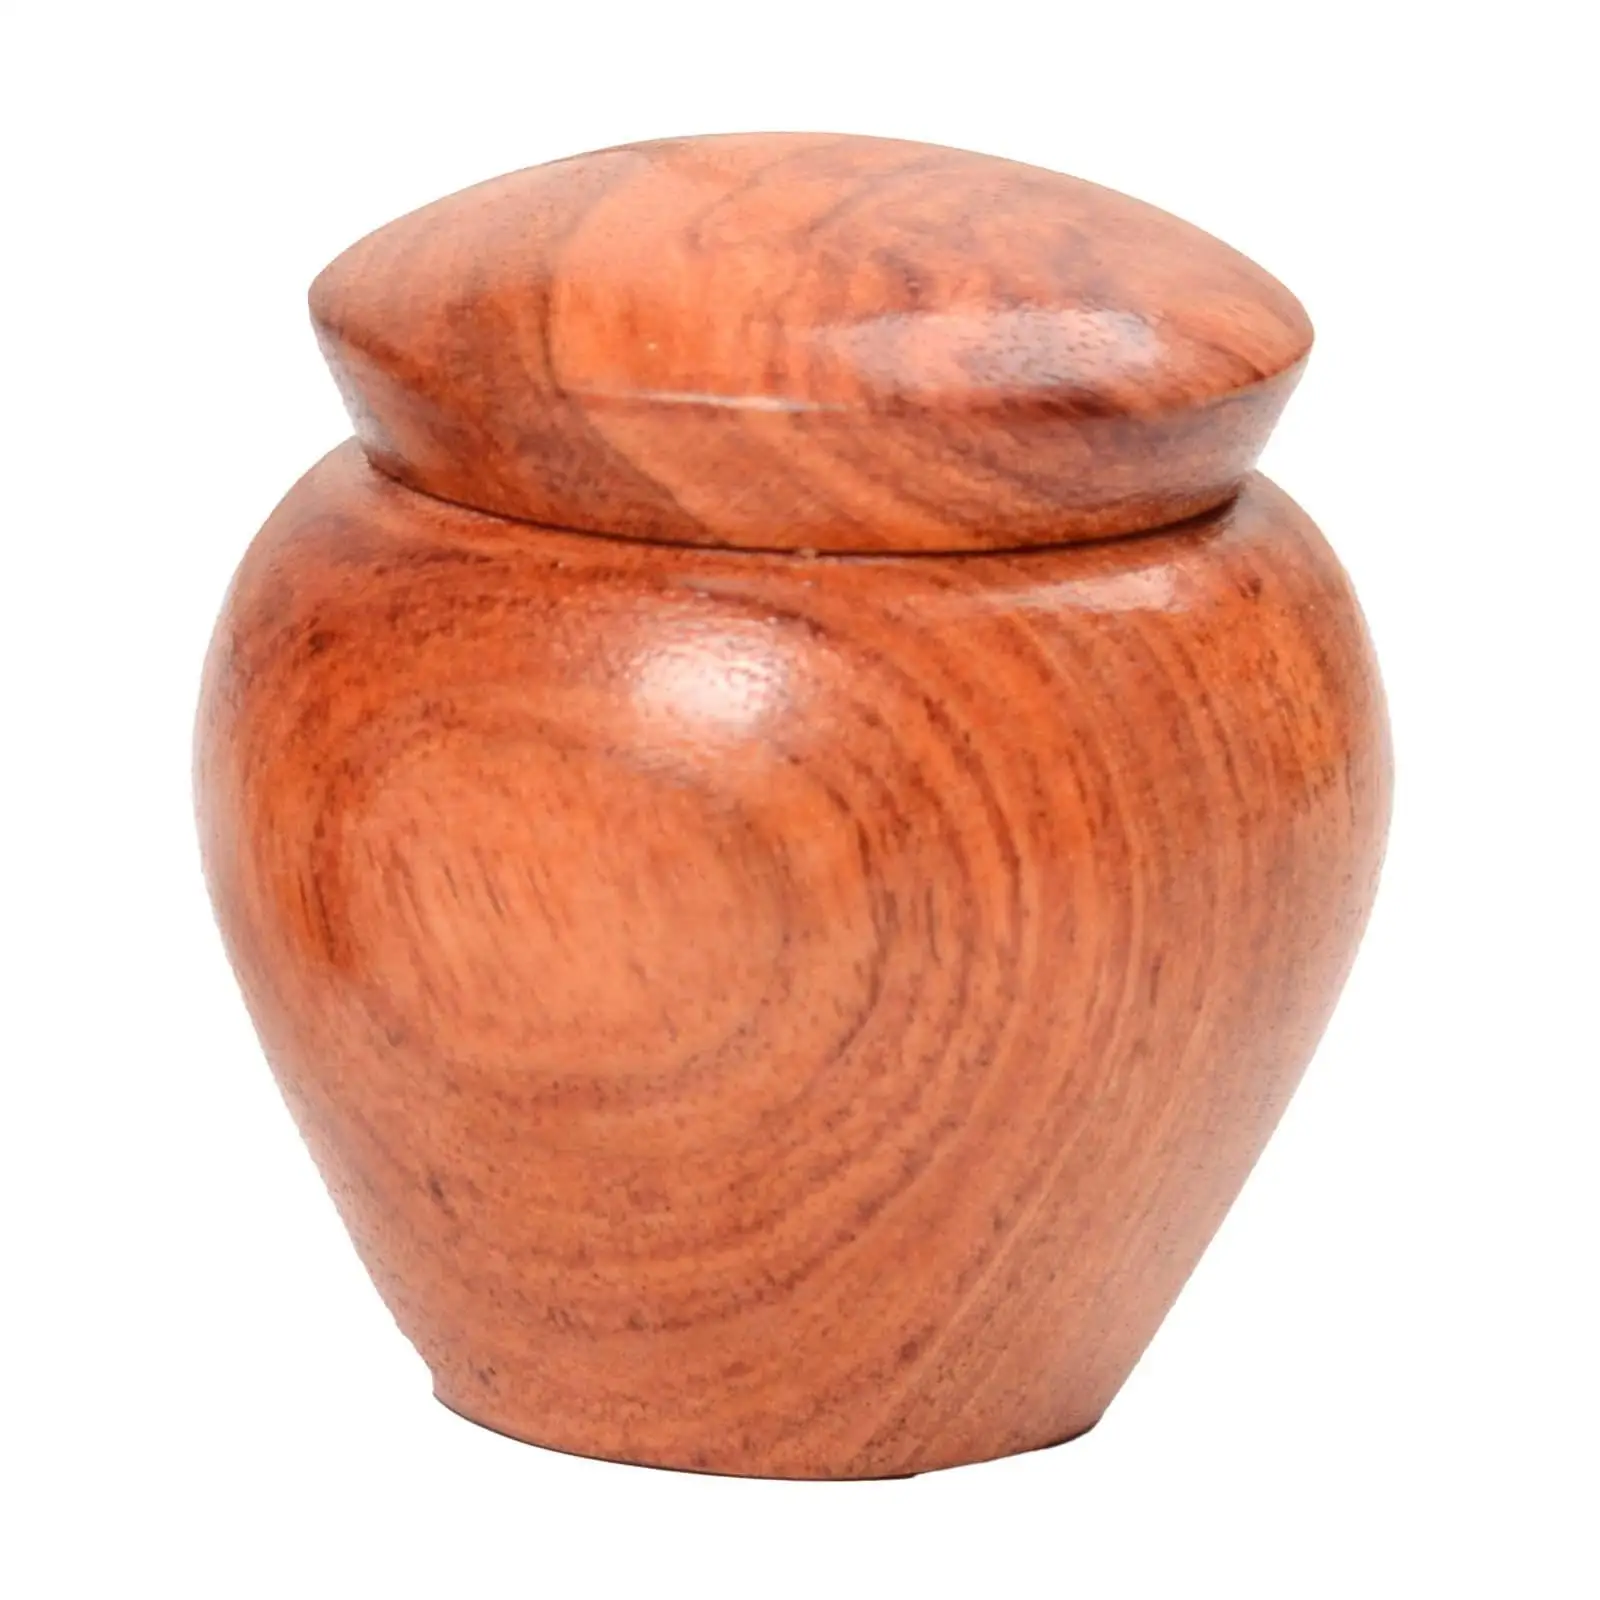 Wooden Storage Jar Seasoning Container Dustproof Beans Candy Chocolate Sugar for Camping Dining Table Cafe BBQ Restaurant